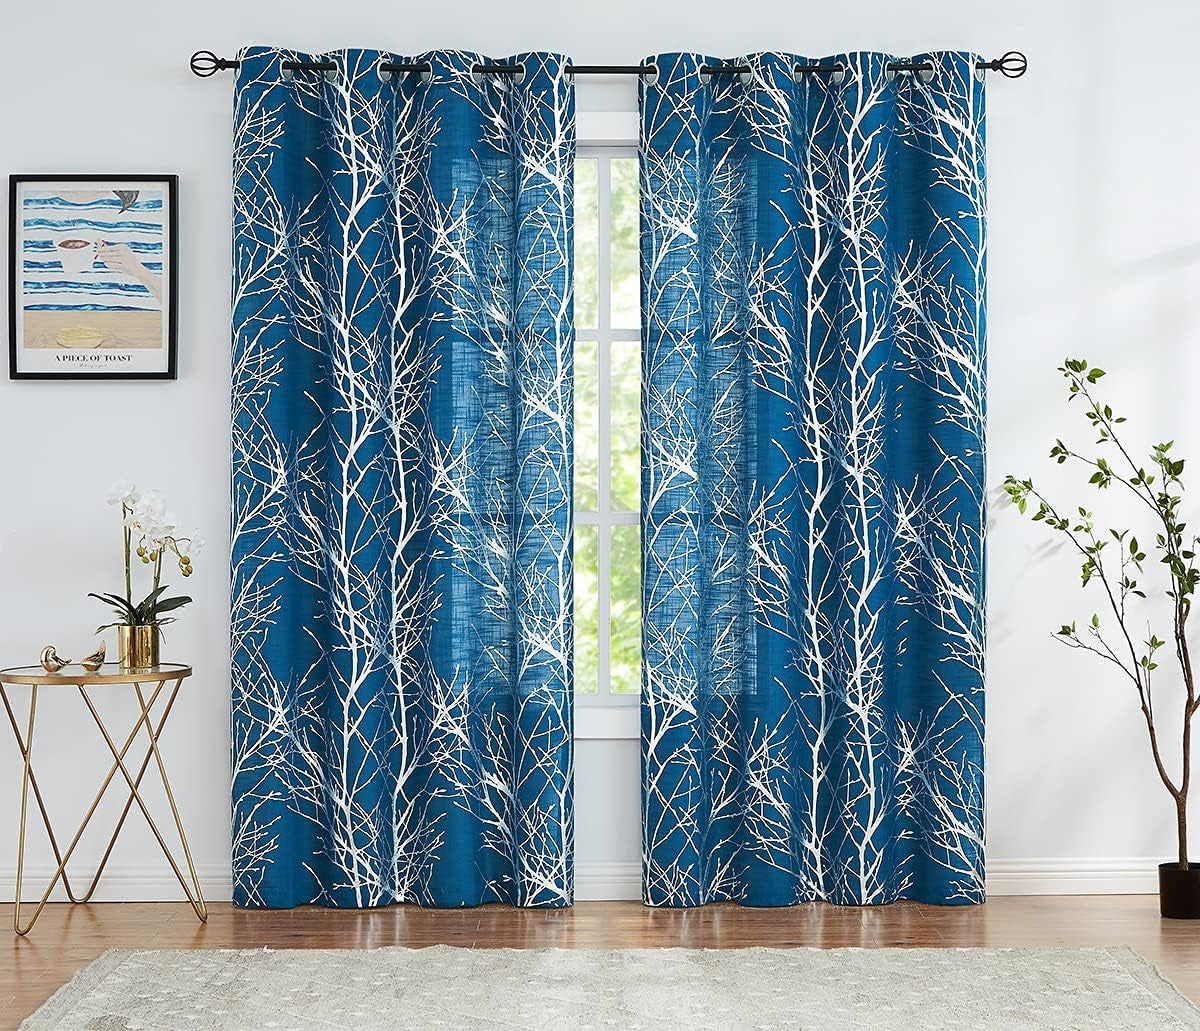 FMFUNCTEX Blue White Curtains for Kitchen Living Room 72“ Grey Tree Branches Print Curtain Set for Small Windows Linen Textured Semi-Sheer Drapes for Bedroom Grommet Top, 2 Panels  Fmfunctex Semi-Sheer: Navy + Foil Silver 50" X 84" |2Pcs 